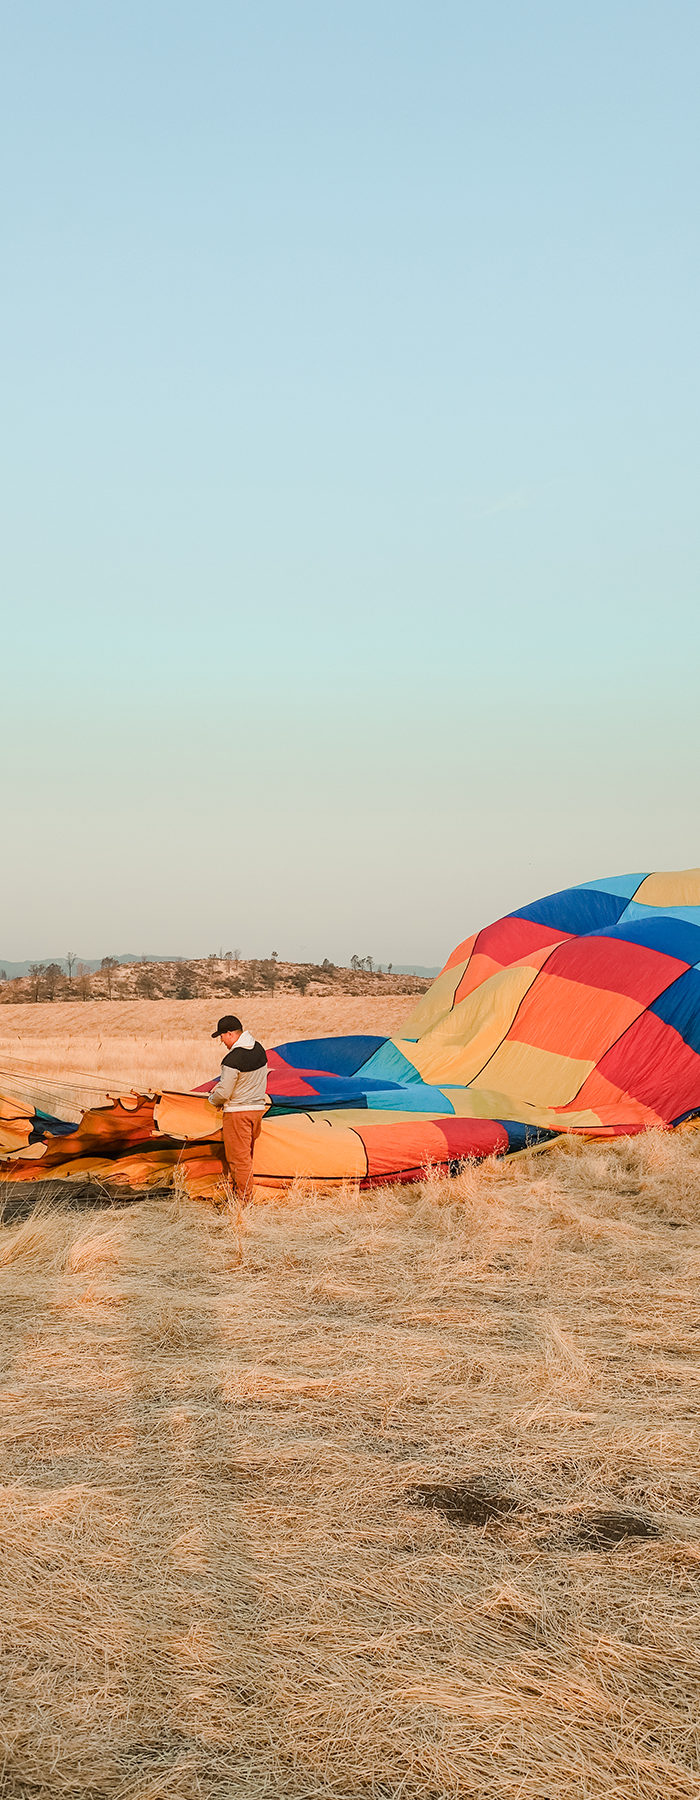 Torrance Coombs and Alyssa Campanella of The A List blog visits Calistoga Balloons with Visit Napa Valley